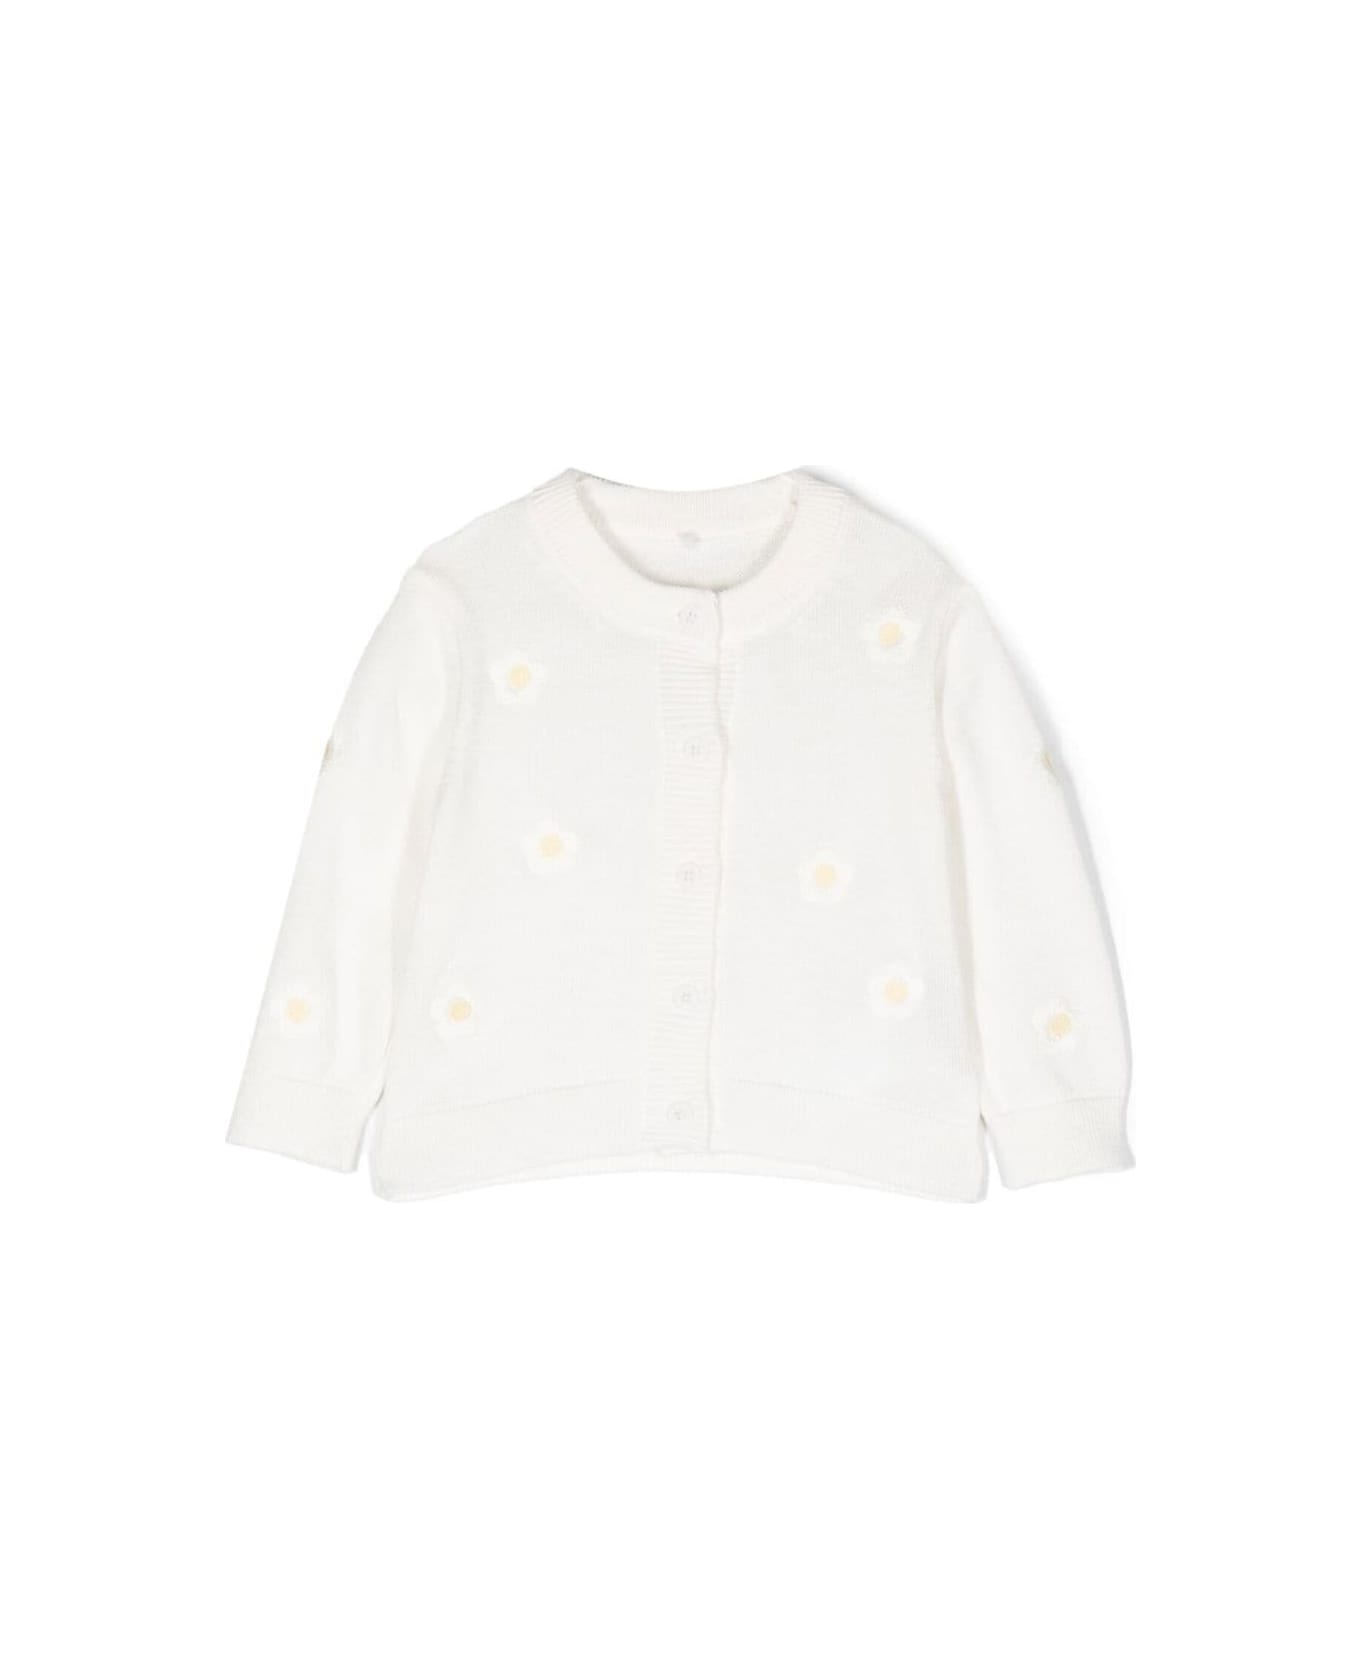 Stella McCartney Kids Floral-embroidered Cardigan In White Cotton Girl - White